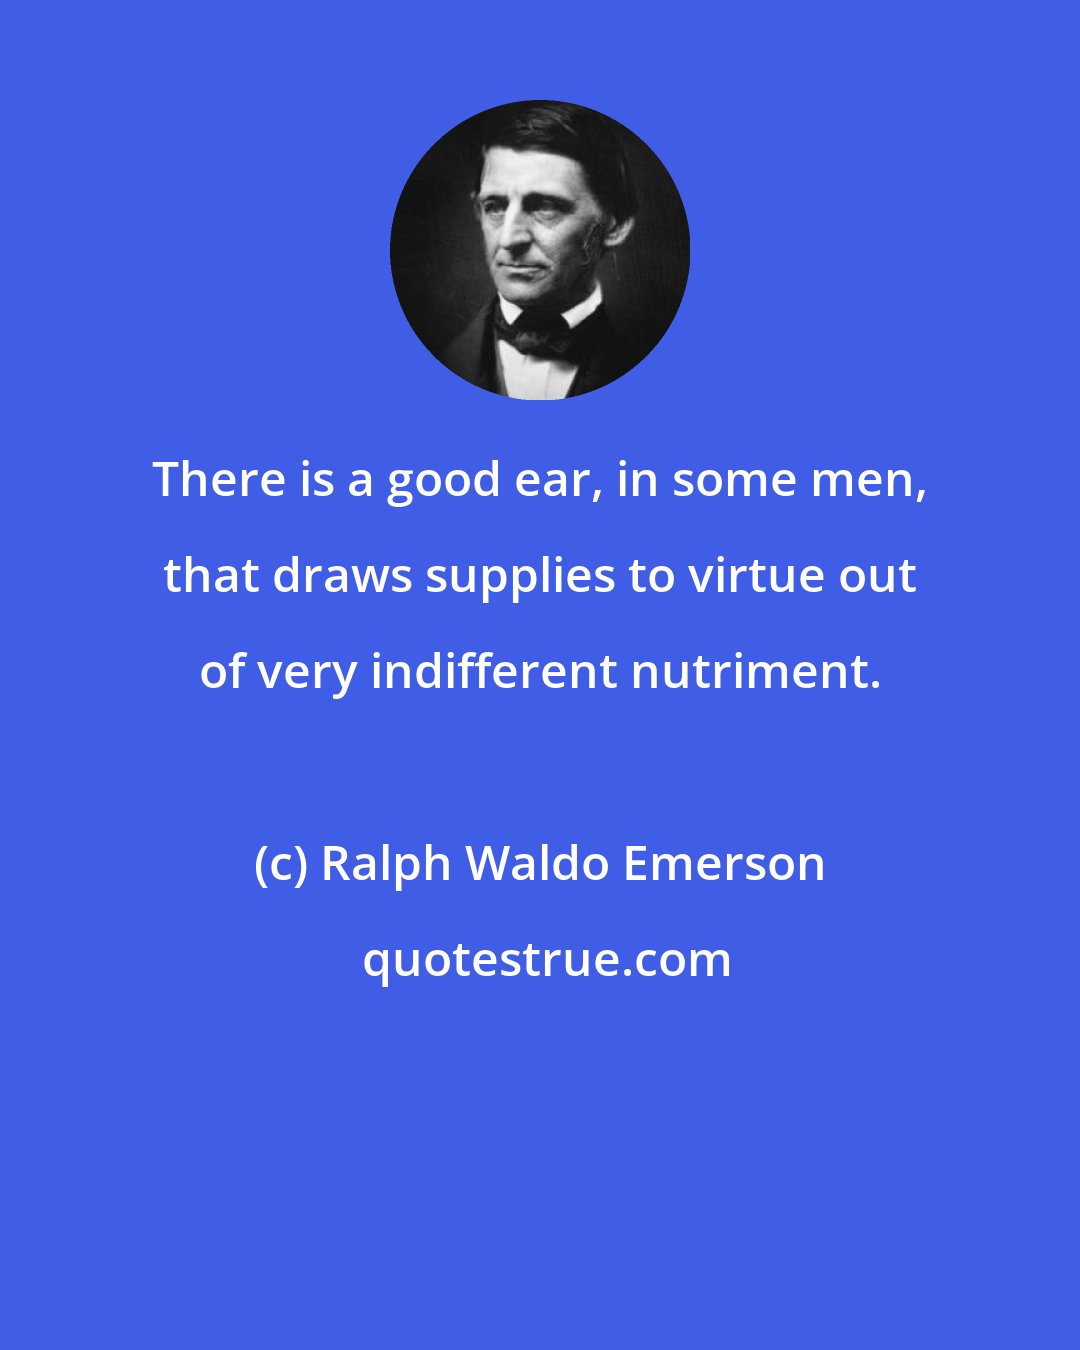 Ralph Waldo Emerson: There is a good ear, in some men, that draws supplies to virtue out of very indifferent nutriment.